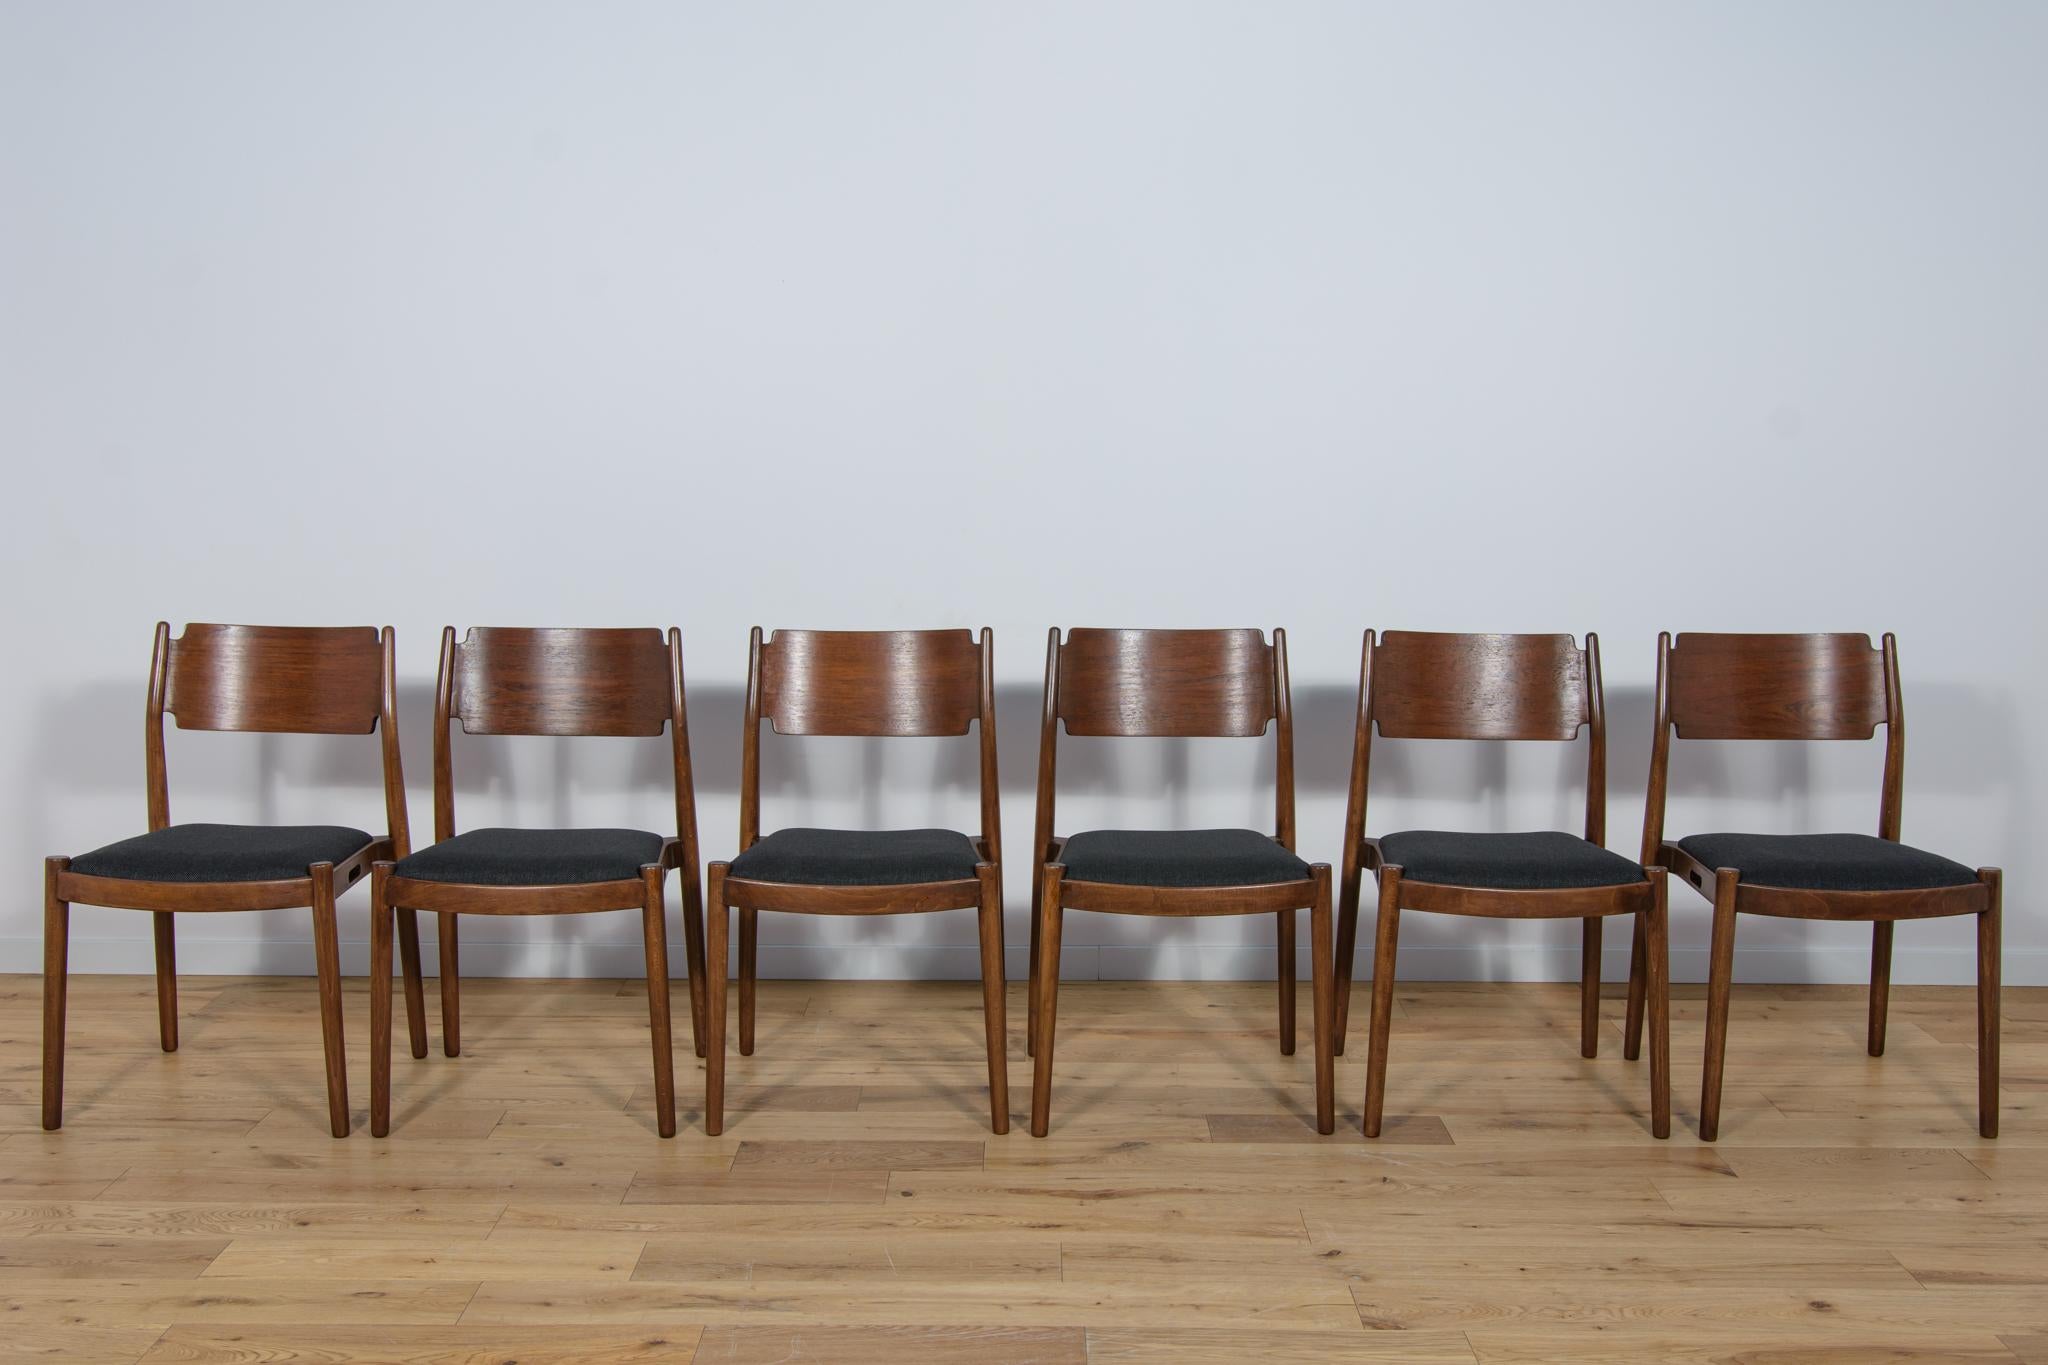 
The set of six chairs was produced in Denmark in the 1960s. The chairs were made of beech wood. The furniture has been thoroughly renovated, cleaned of old coatings, stained with rosewood stain, and finished with a strong semi-matt varnish.